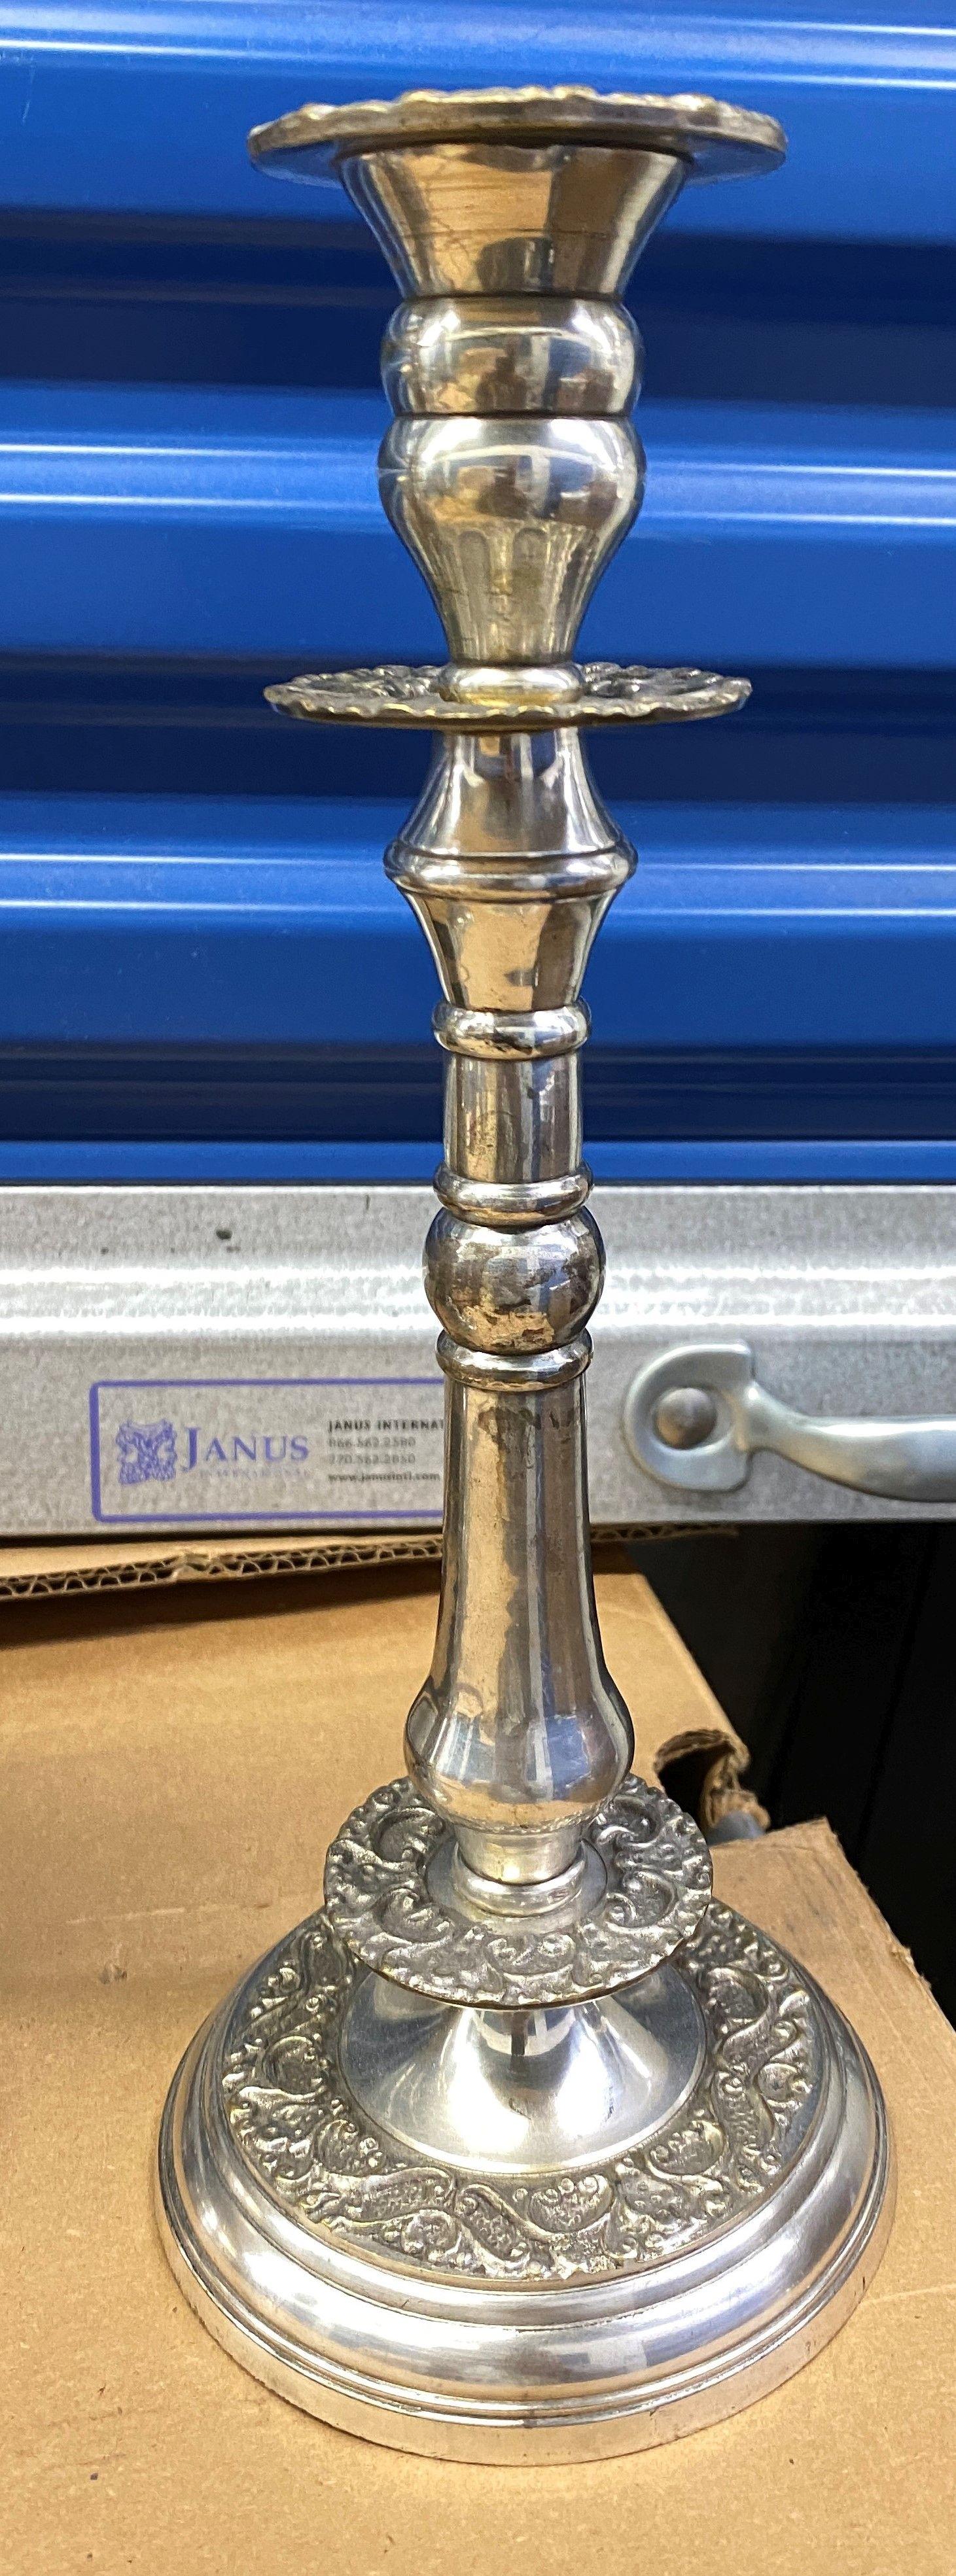 Pair of 11" Decorative Silver Plated Candle Sticks